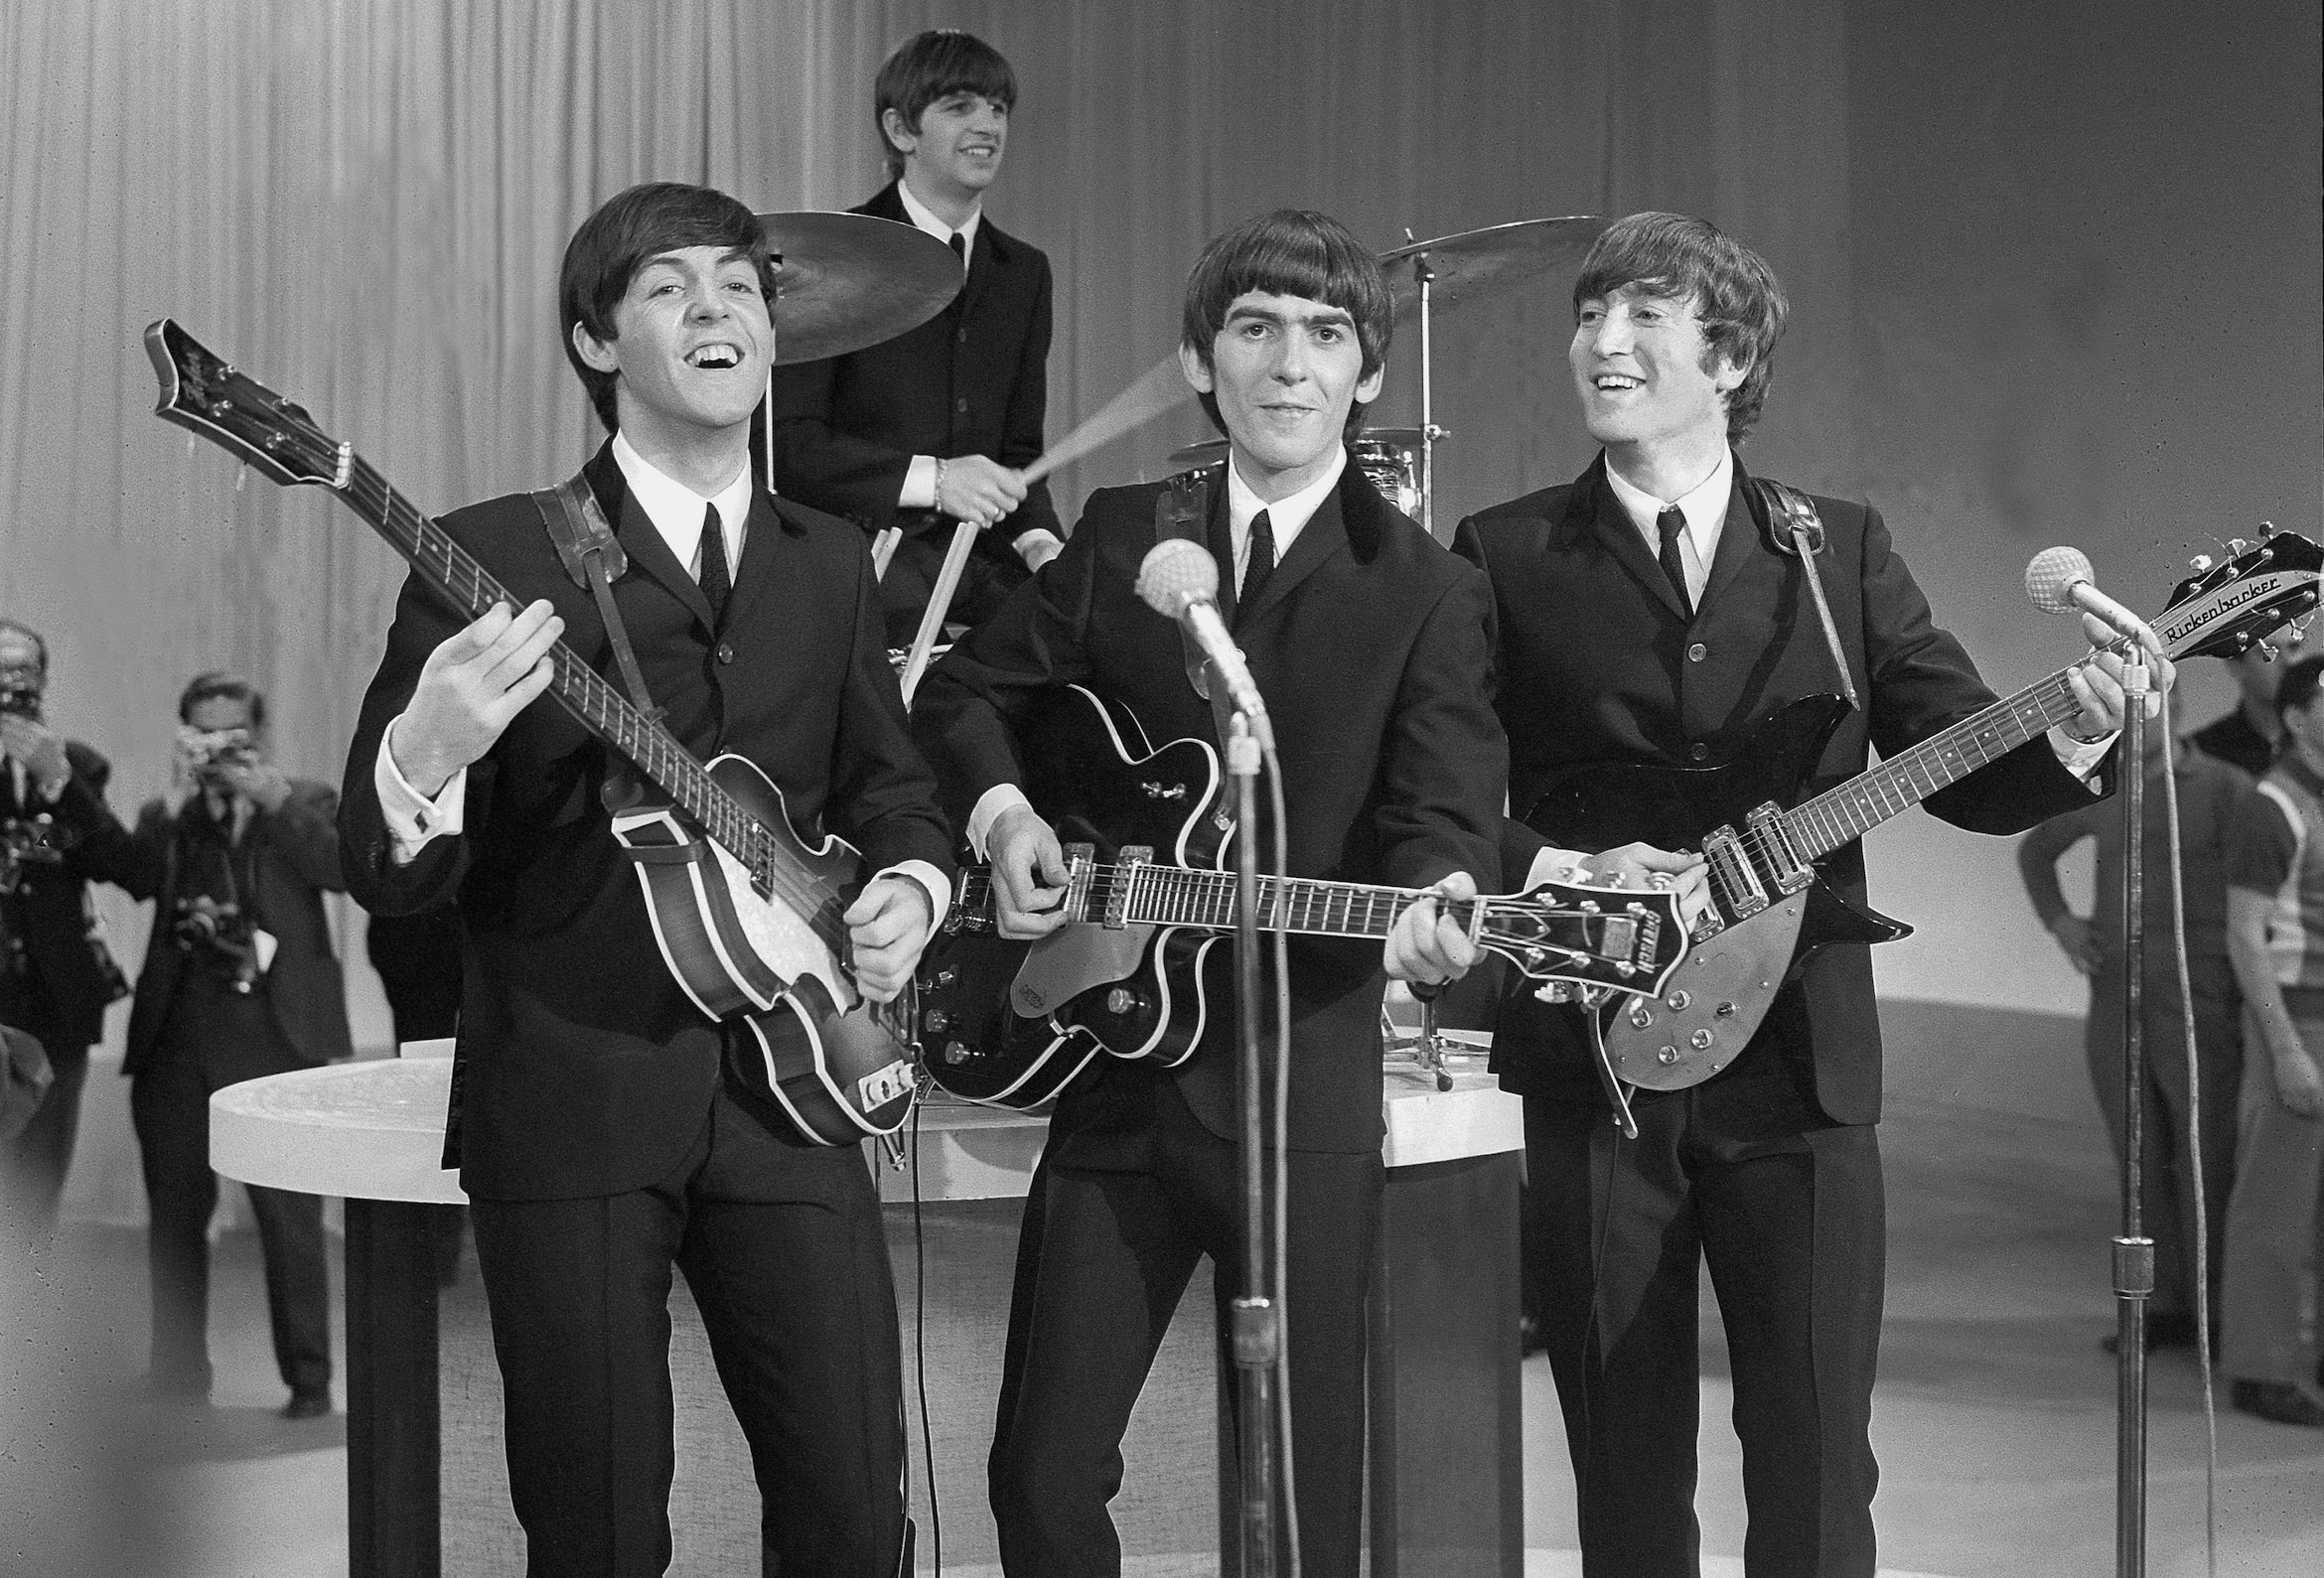 The Beatles prepare for their appearance on The Ed Sullivan Show in 1964